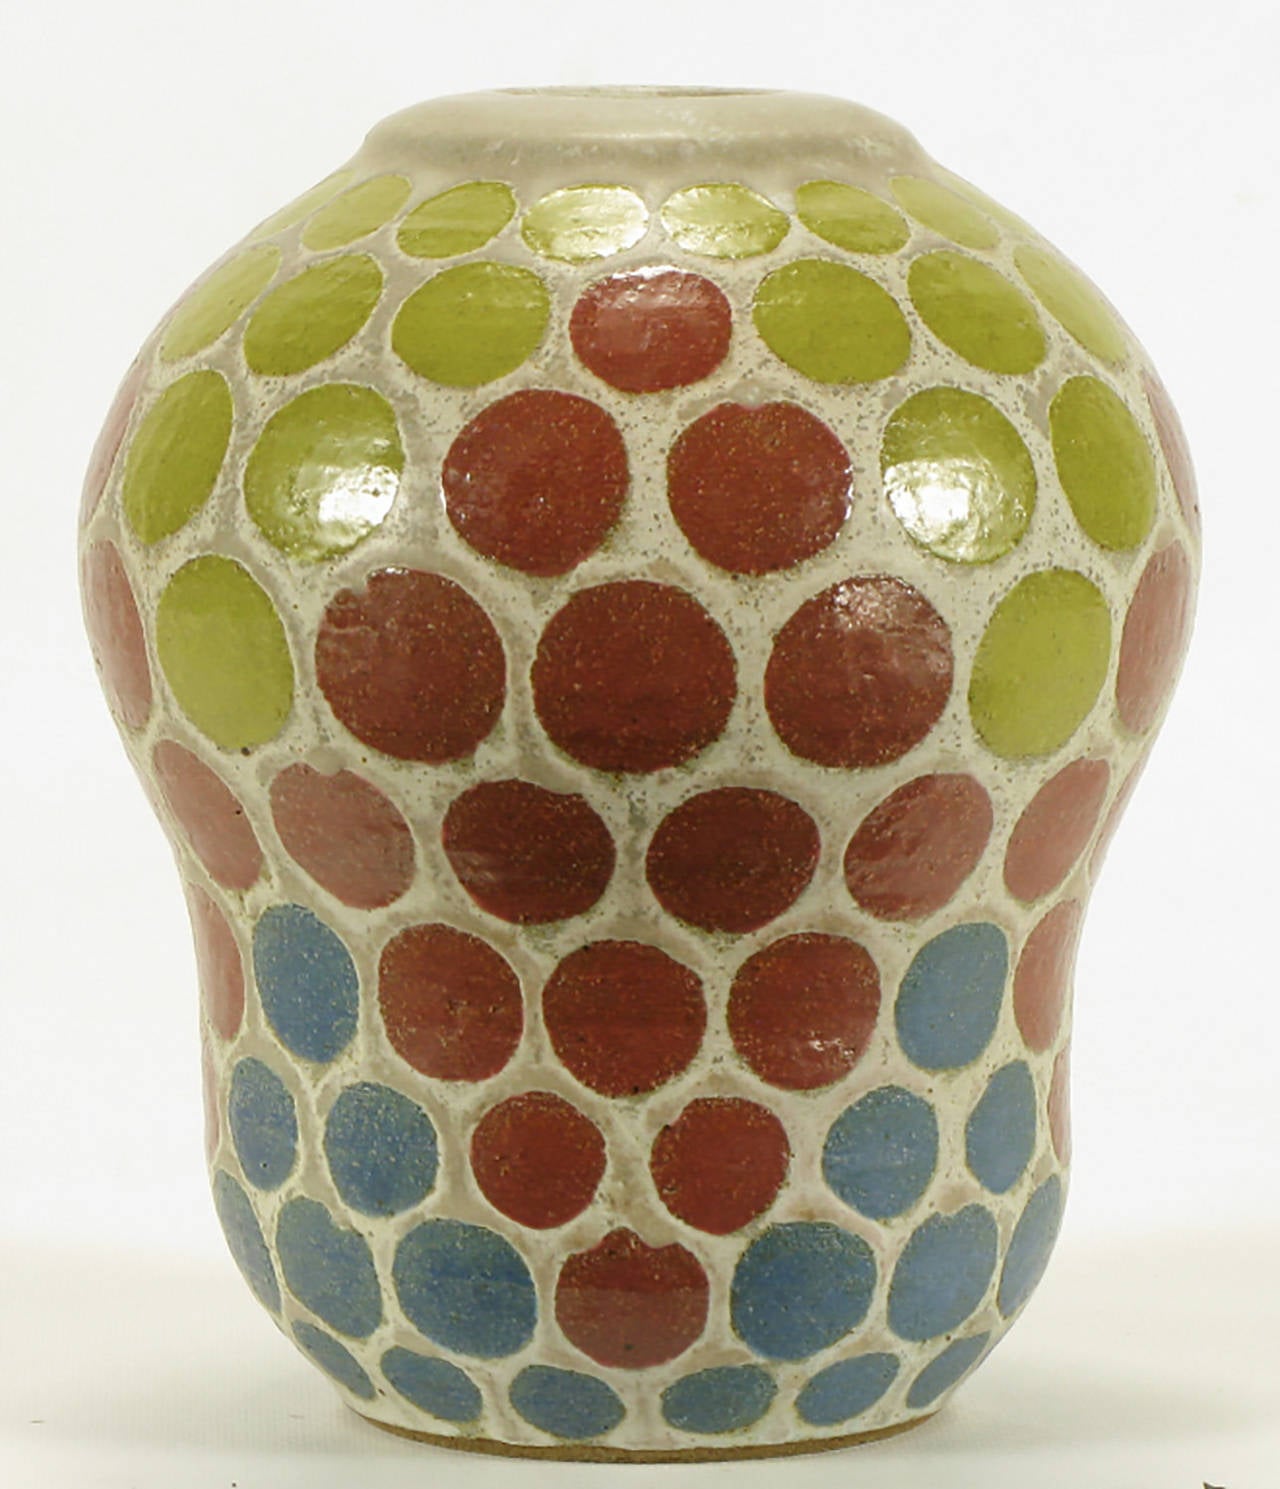 Inverted pear shaped ceramic vase with patterned polka dots by Tomiya Matsuda (1939-2011). Small circular top opening and background of off-white earthen glaze. Patterned circles in umber, cerulean blue and olive.

Until 1948, Japanese ceramic